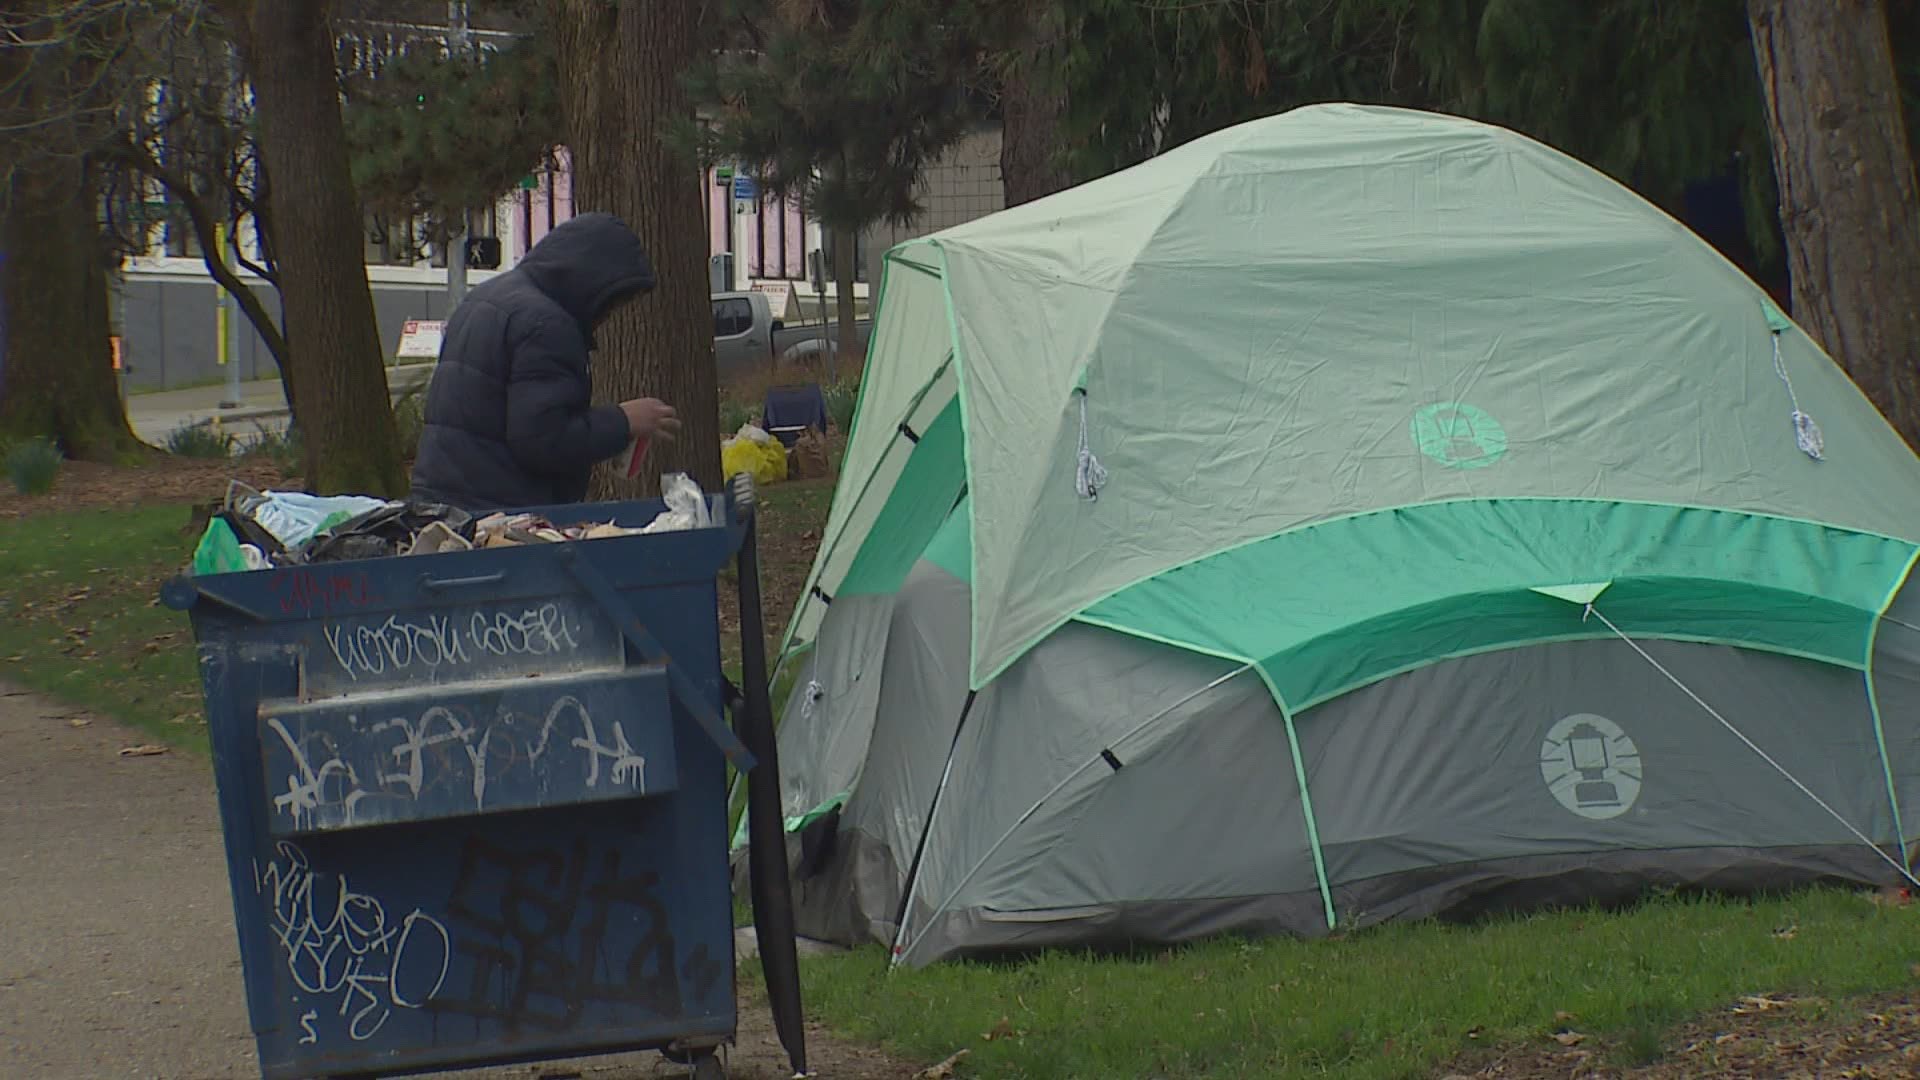 Volunteer groups have reached out to offer housing and support.  But some refused the help and remain in the park.